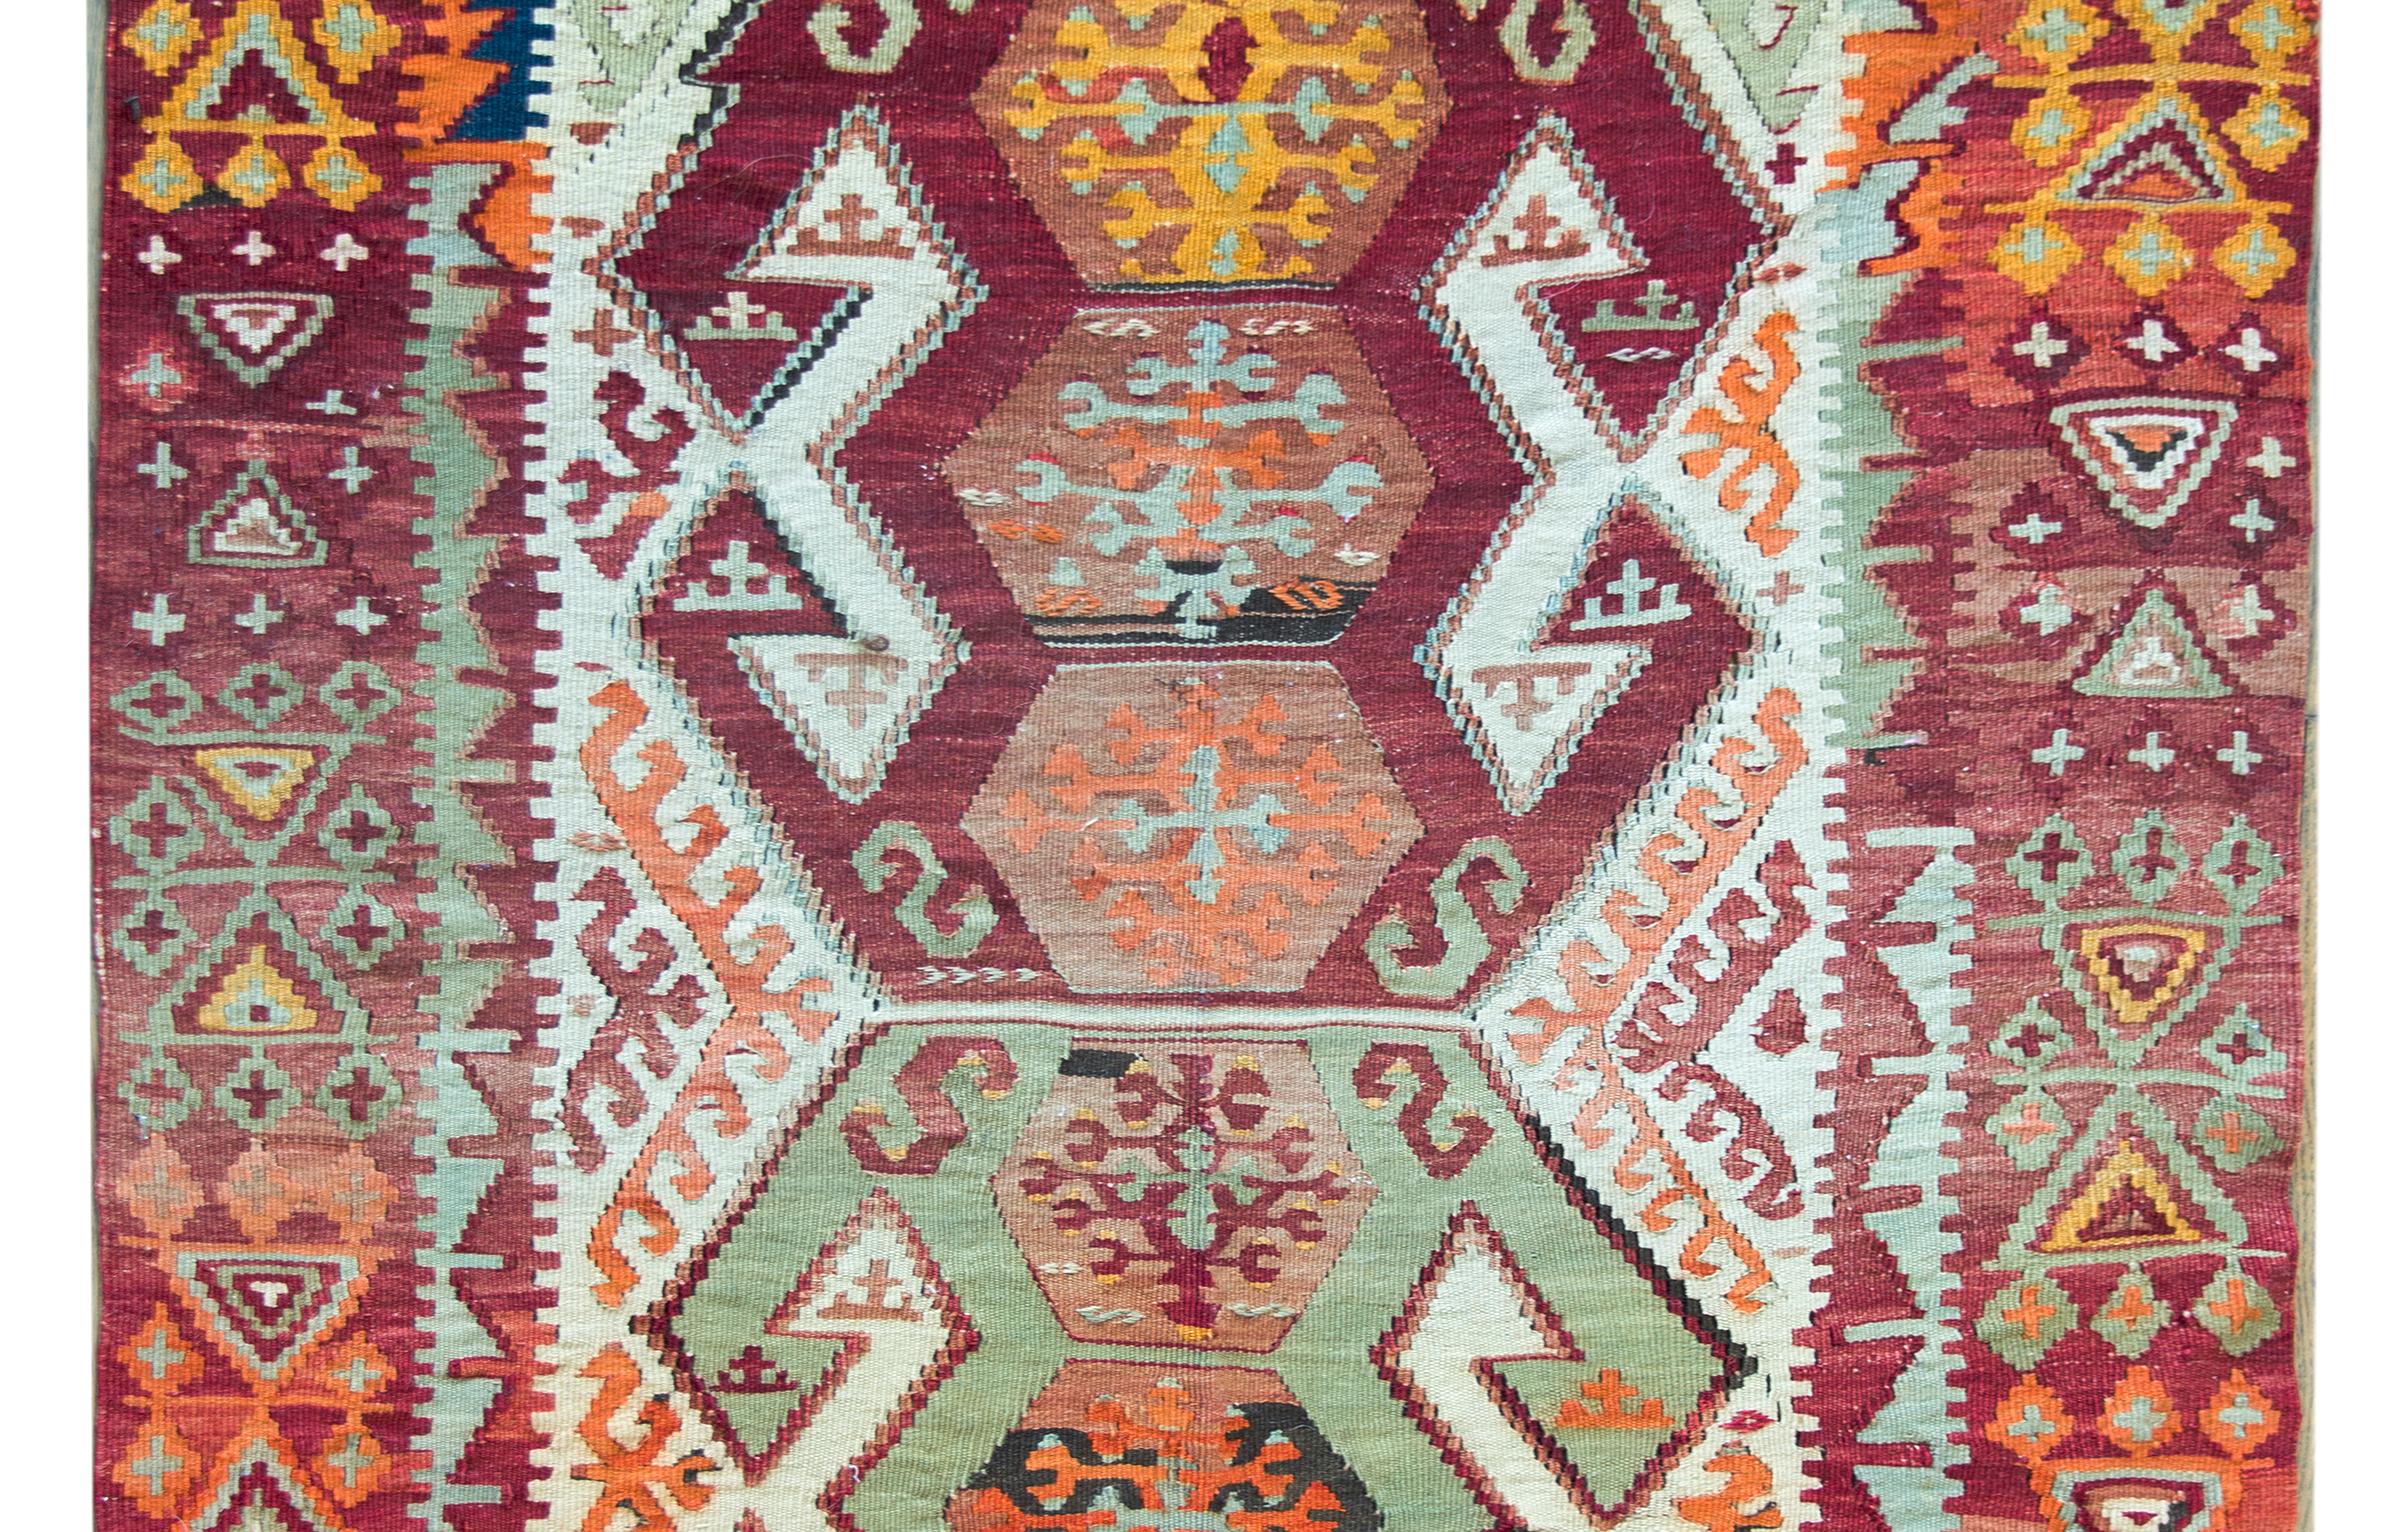 An incredible and bold mid-20th century Turkish Konya kilim rug with two large geometric pattered medallion with myriad styled flowers and surrounded by a fantastic border with more stylized flowers and geometric shapes, and all woven in bright